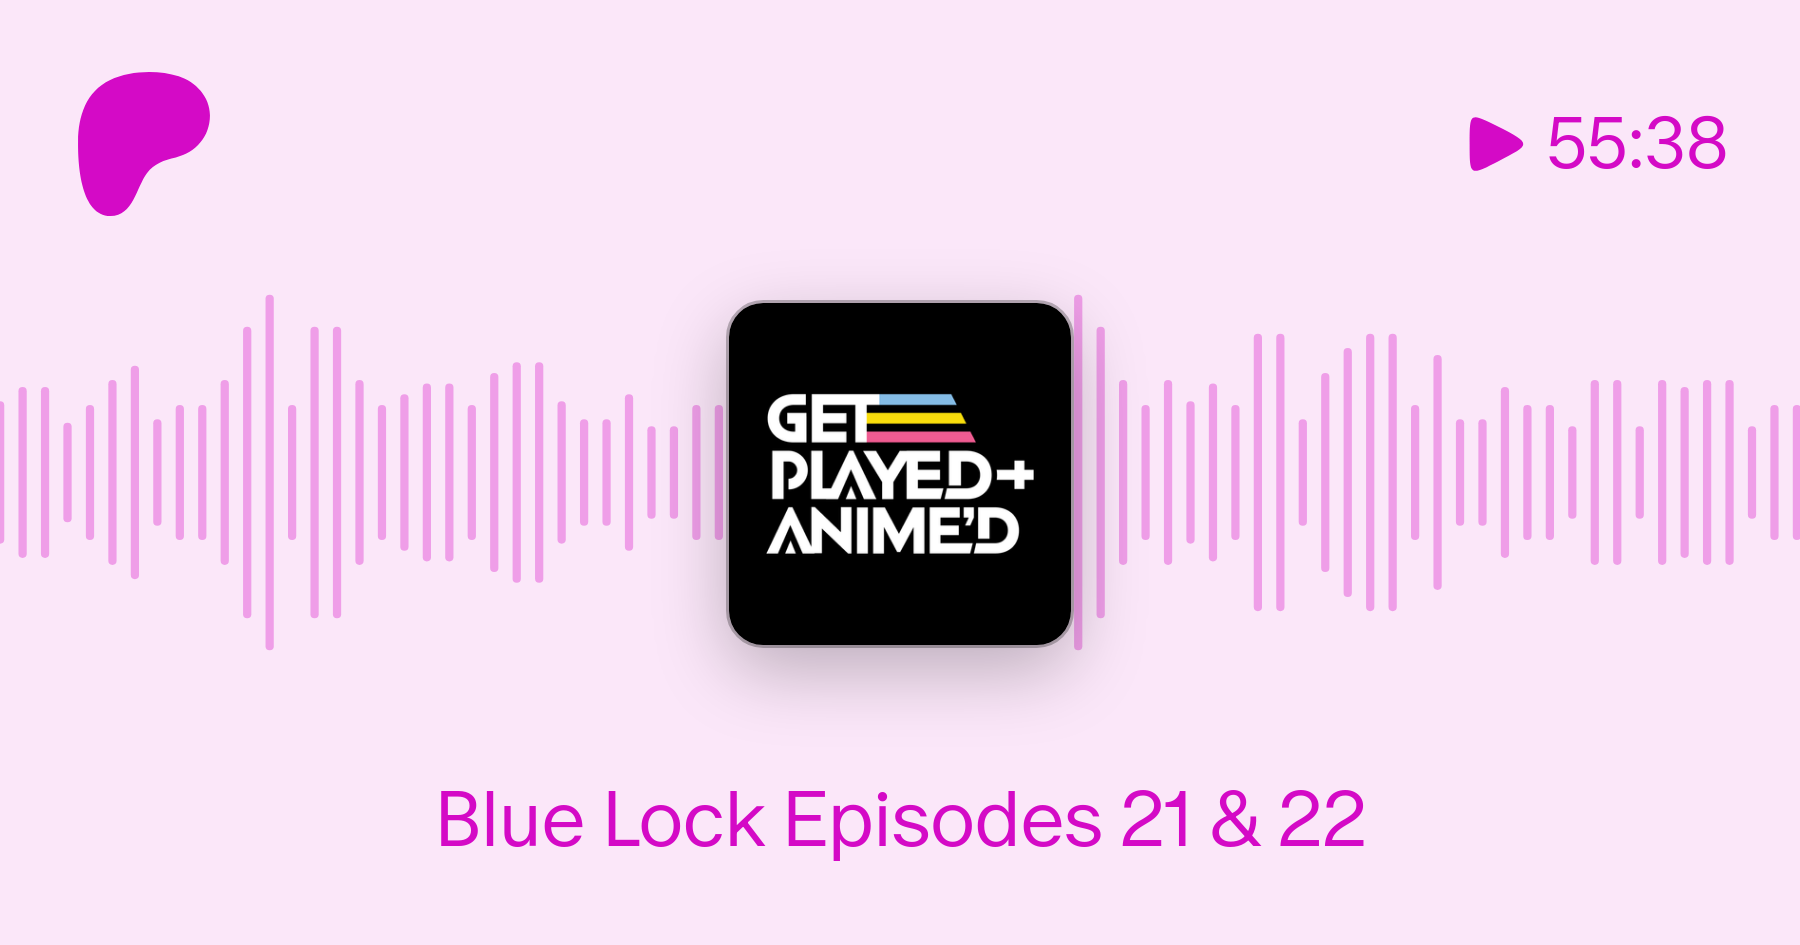 Today on Get Anime'd, Heather, Nick and Matt discuss episodes 21 & 22 of Blue  Lock, I'm Not There & Voice.